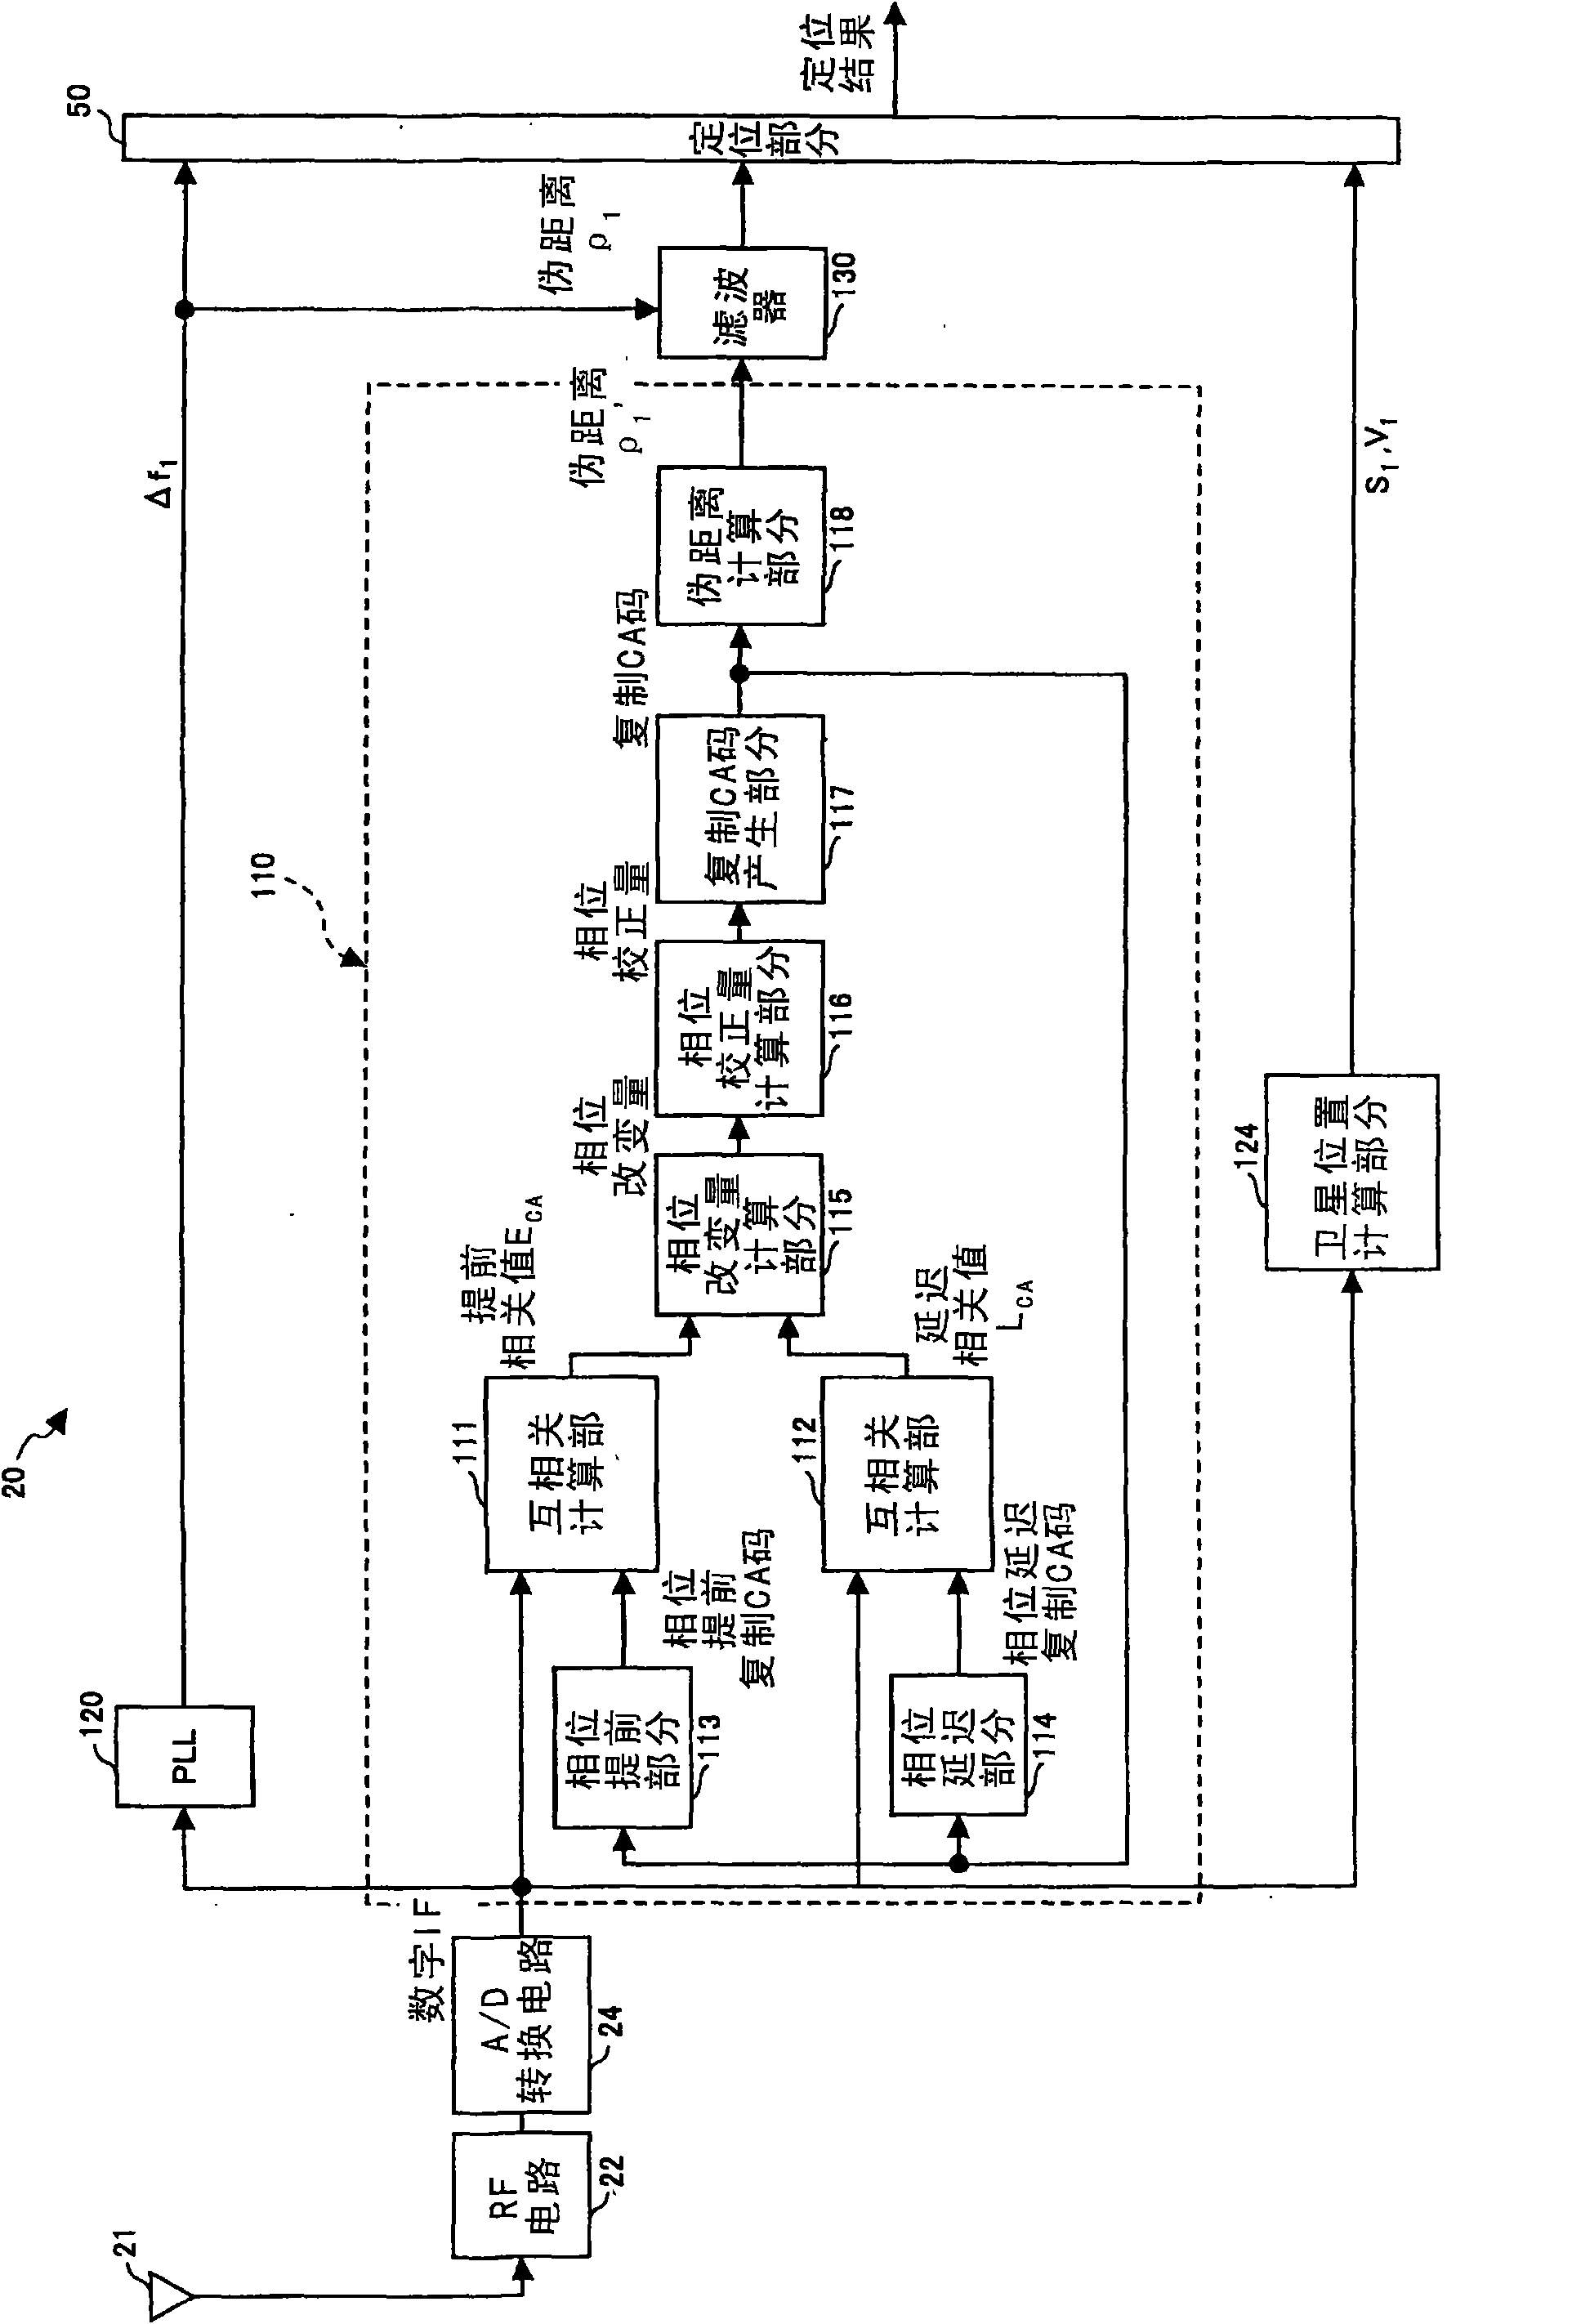 Mobile positioning apparatus